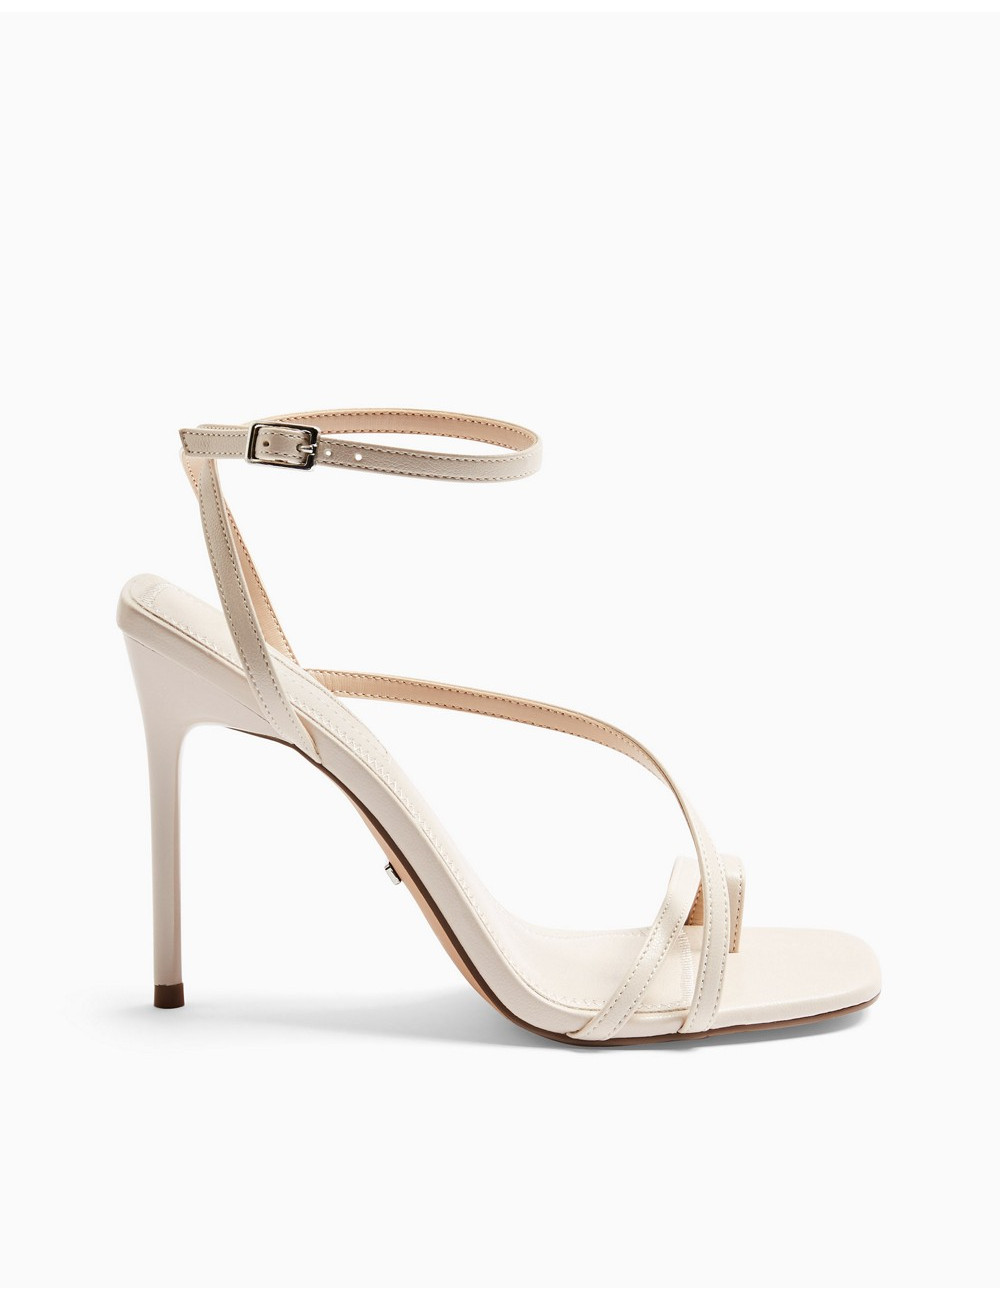 Topshop strappy heeled...